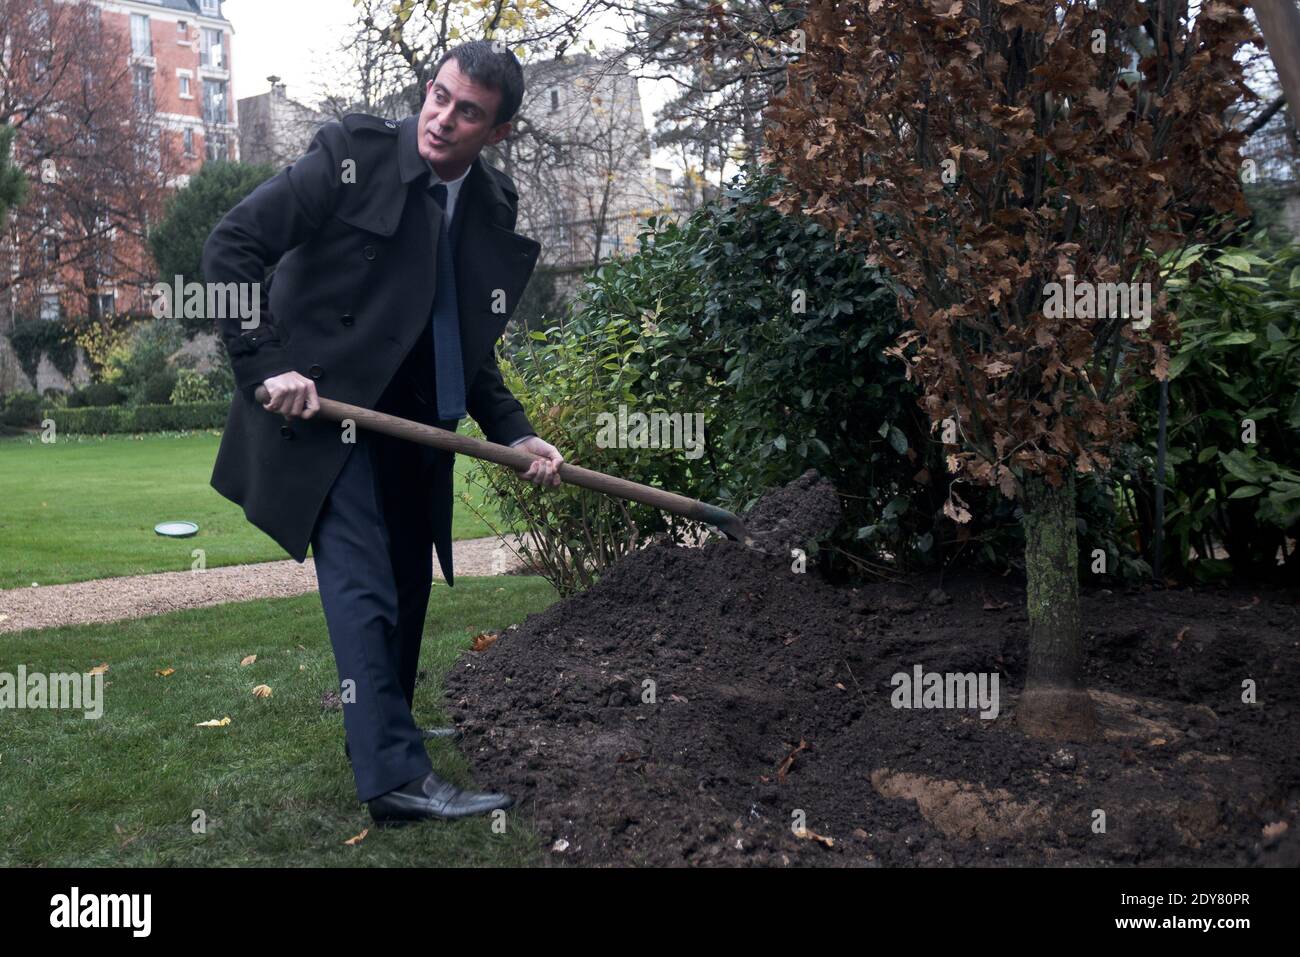 French Prime Minister Manuel Valls - as is the republican tradition - plants the tree called 'of the Prime Minister' in the gardens of his headquarters Hotel de Matignon in Paris, France on December 16, 2014. The tree, chosen by the Prime Minister, is an oak of the species 'Quercus robur fastigiata' and is located on the front lawn. The tradition of planting a tree at the PM's headquarters was introduced by the late Prime Minister Raymond Barre in 1978. Photo Pool by Nicolas Messyasz/ABACAPRESS.COM Stock Photo